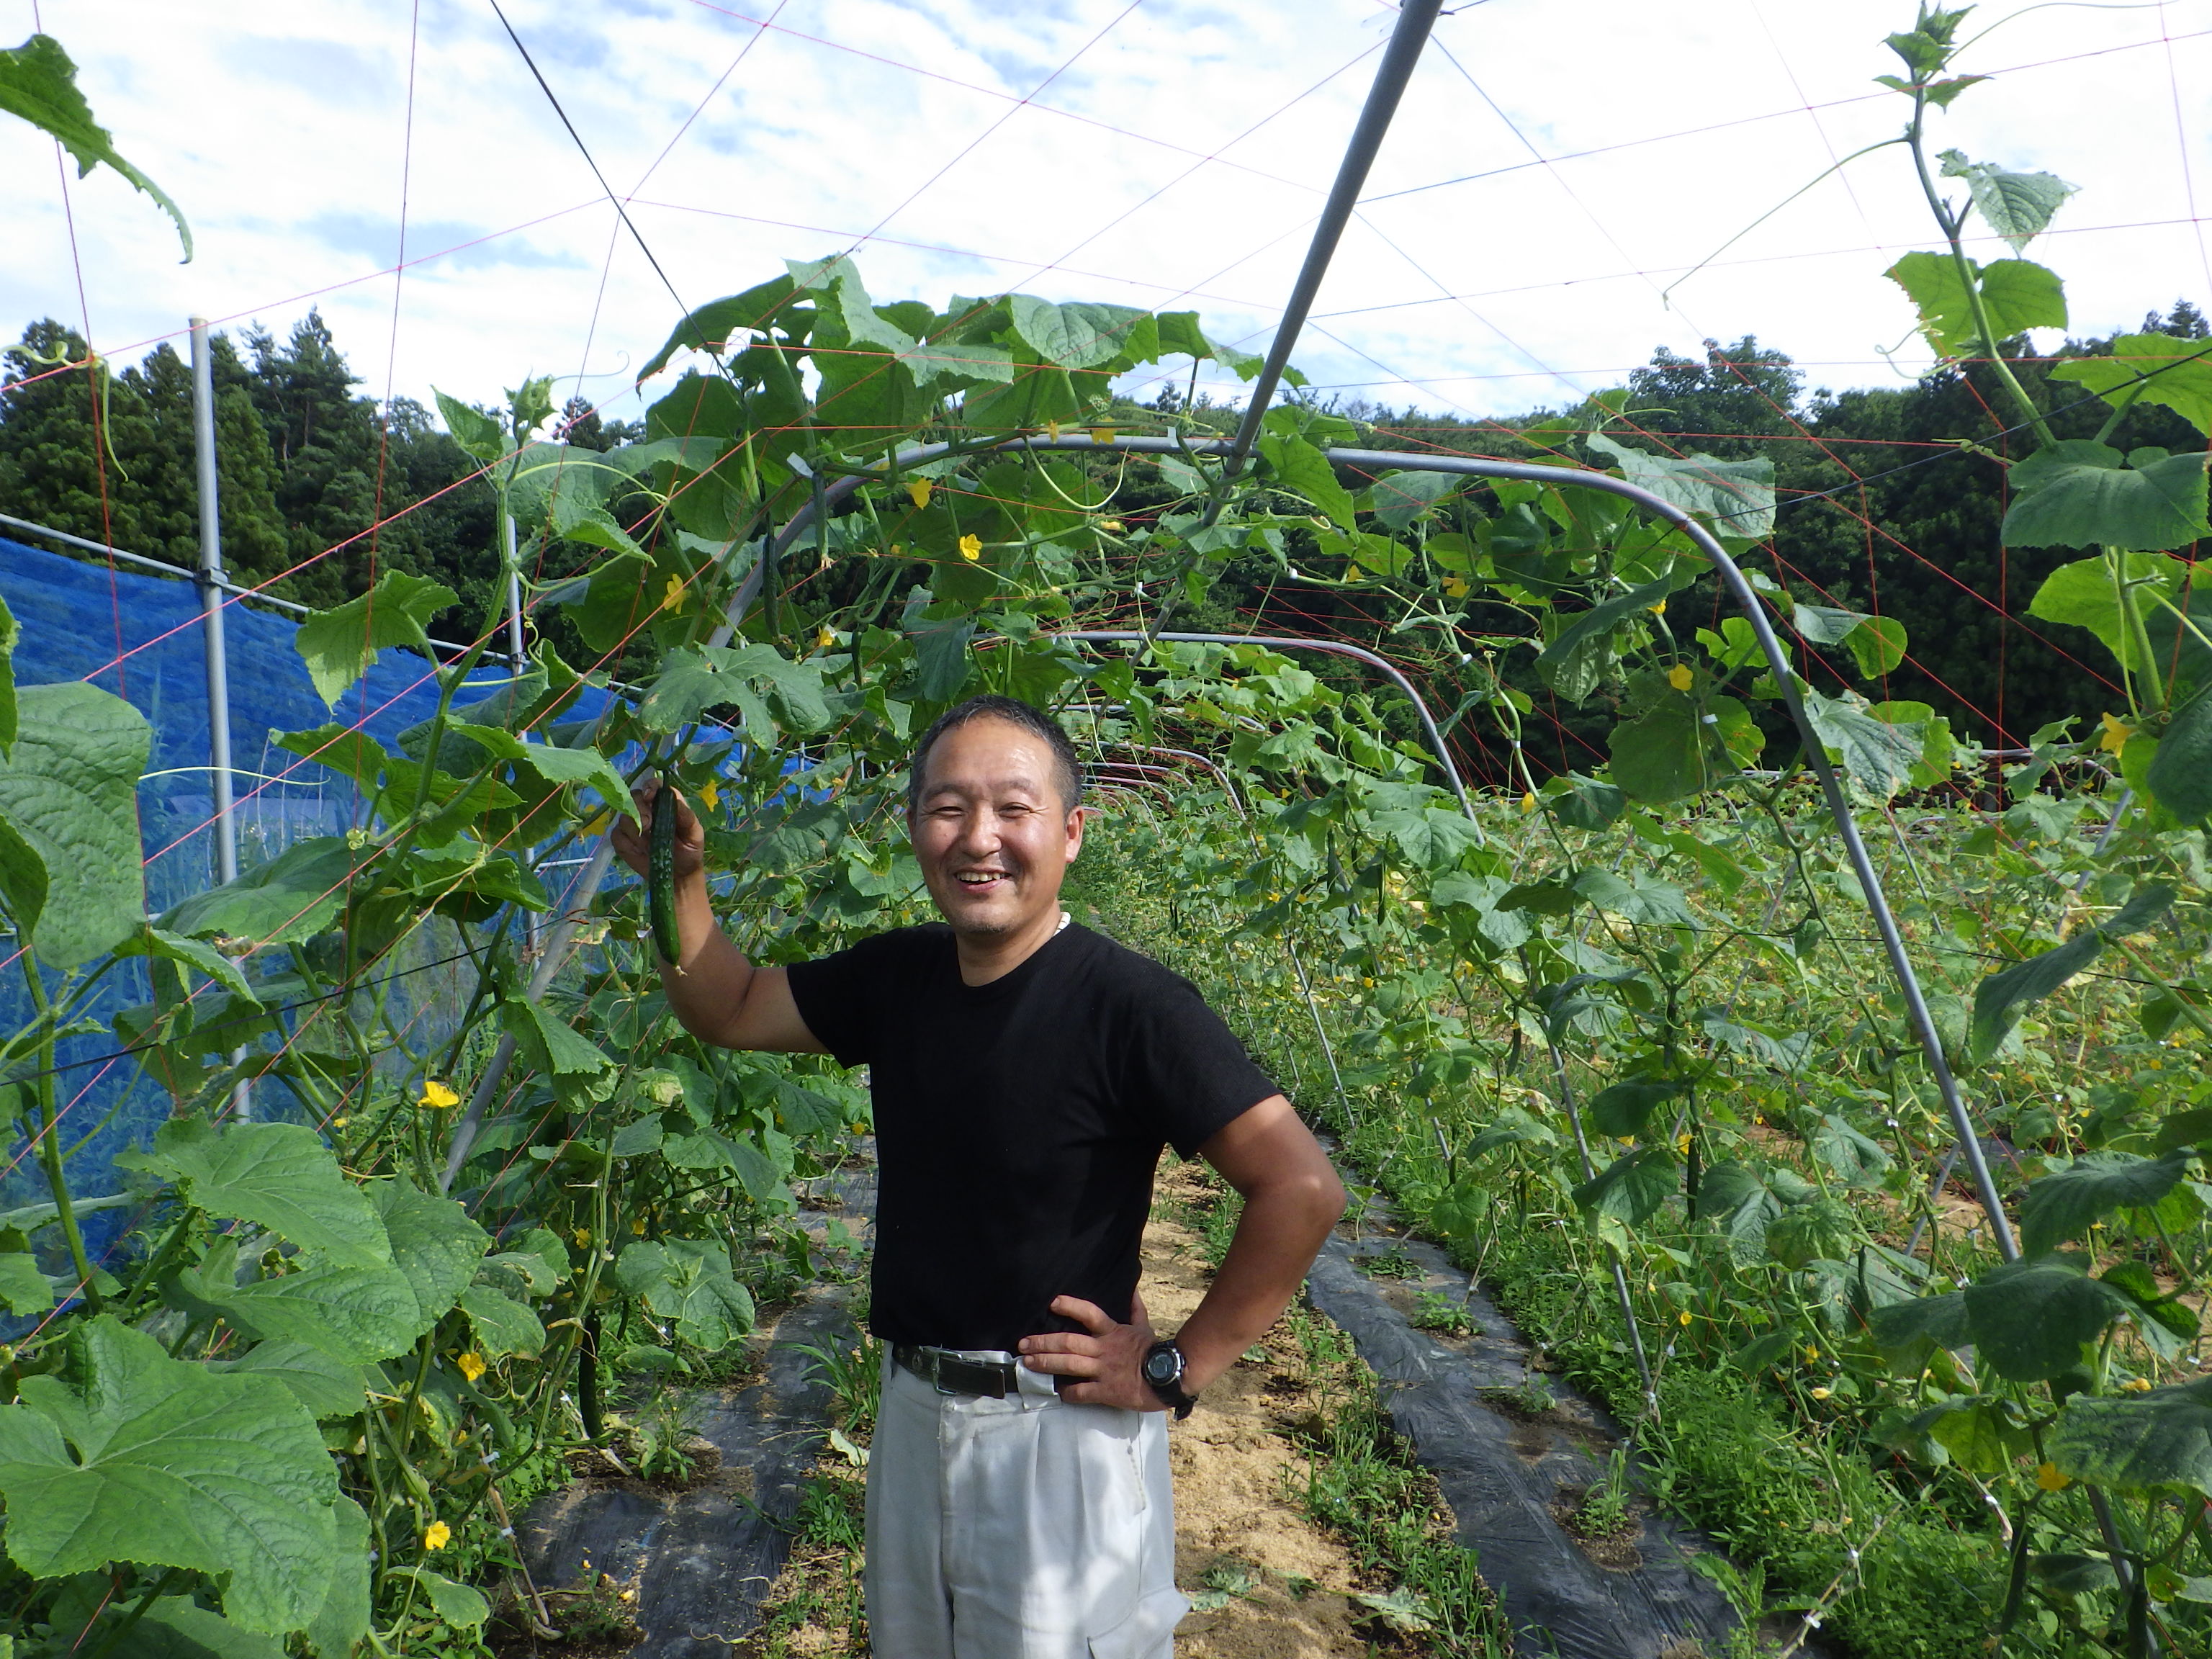 A Cucumber Farm Quickly Recovered After the Nuclear Plant Accident in Fukushima